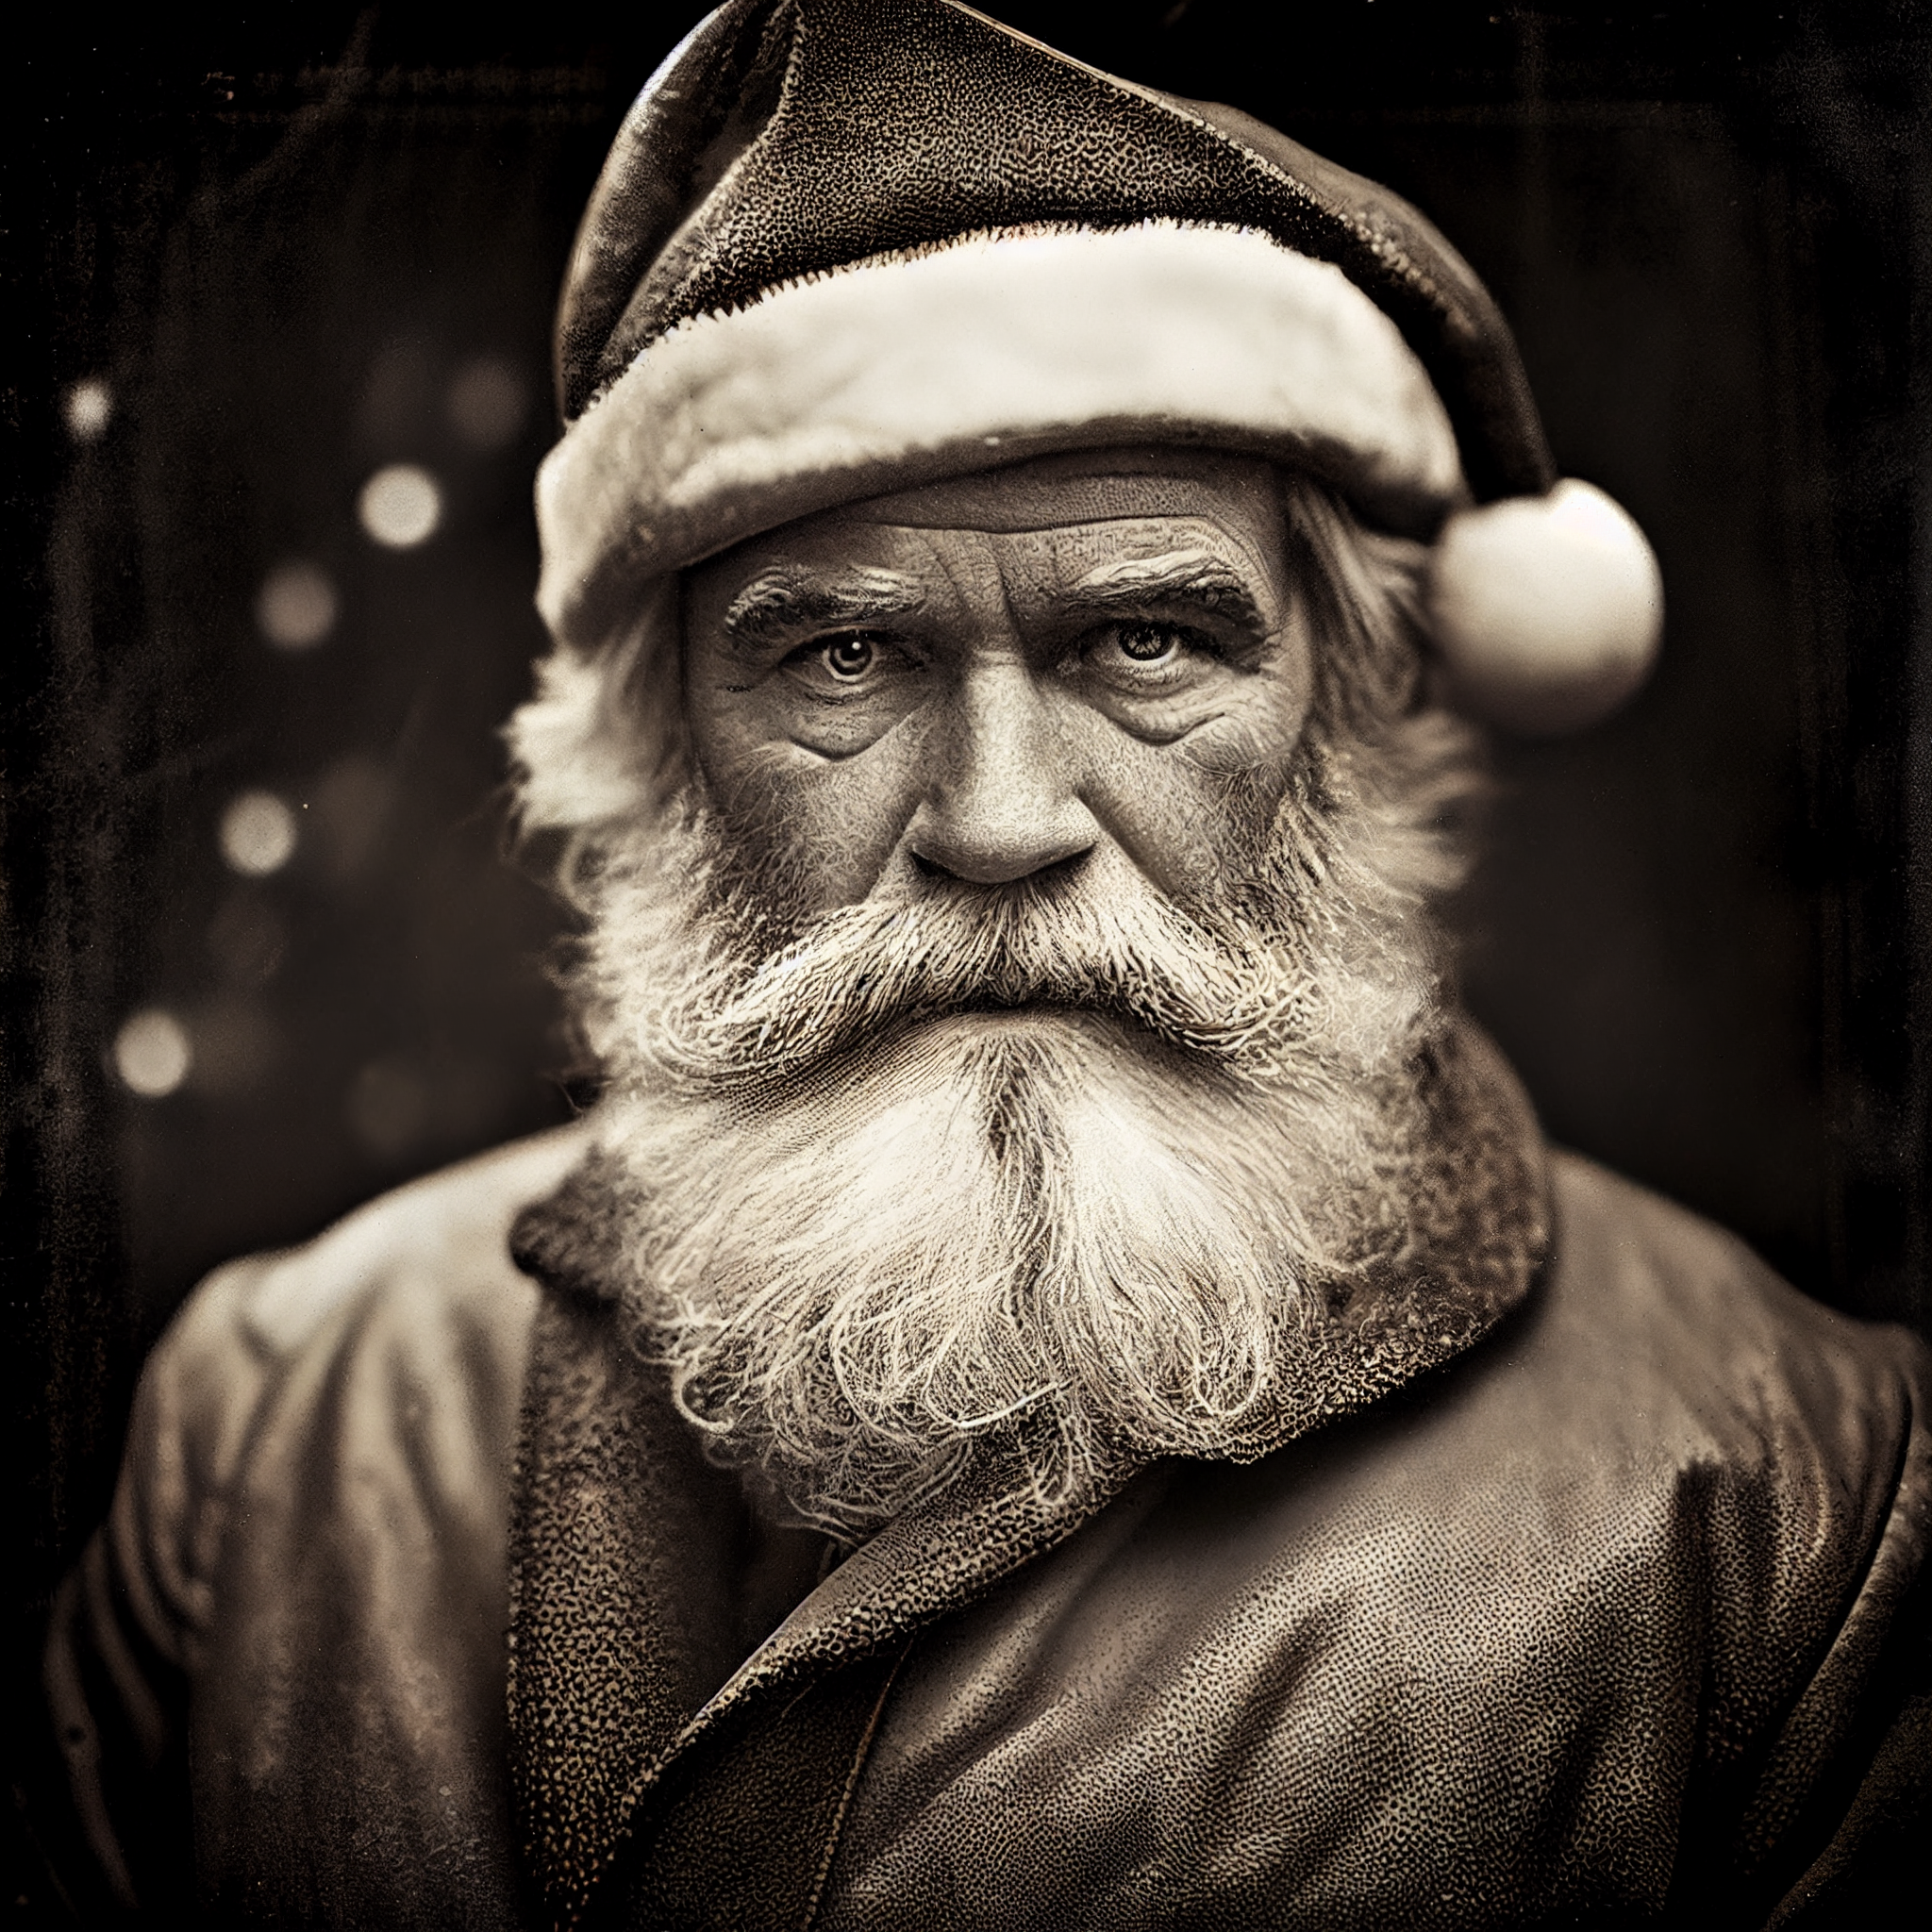 danhowl_Santa_Claus_in_the_style_of_Indiana_Jones_action_advent_4ef5483e-68a1-47d1-9a89-a48b511238c8